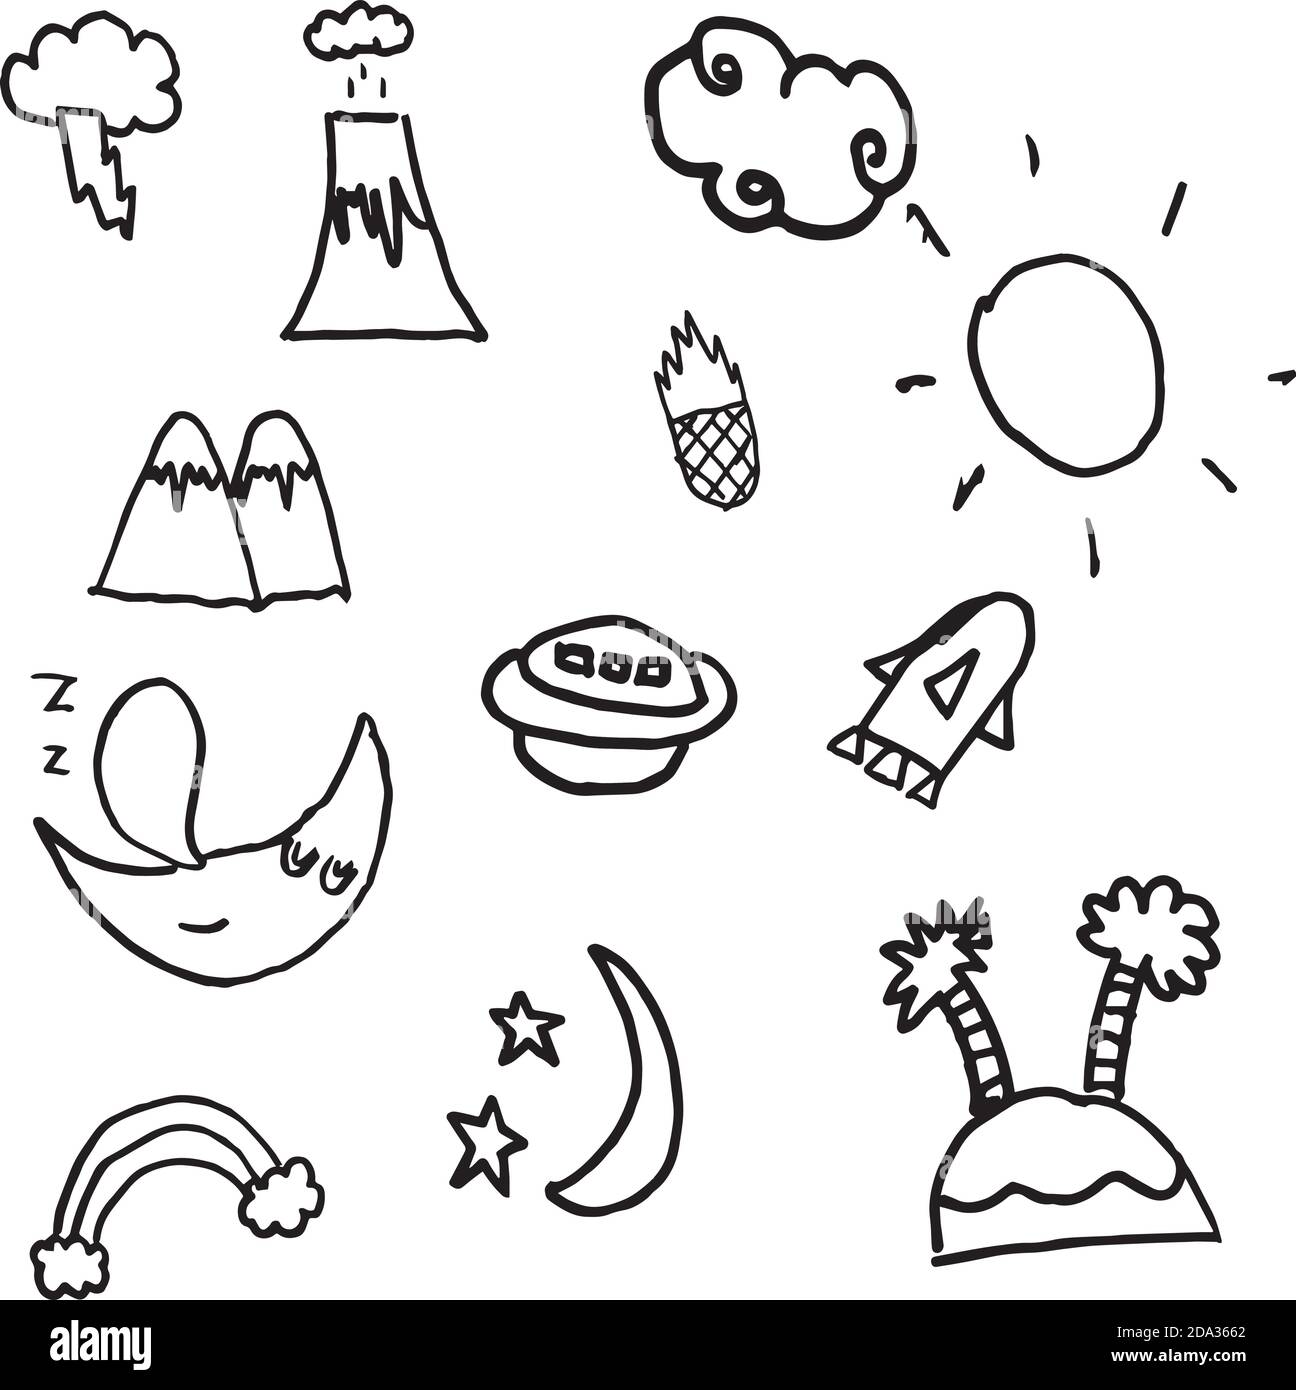 illustration vector doodle hand drawn picture set by children Stock Vector